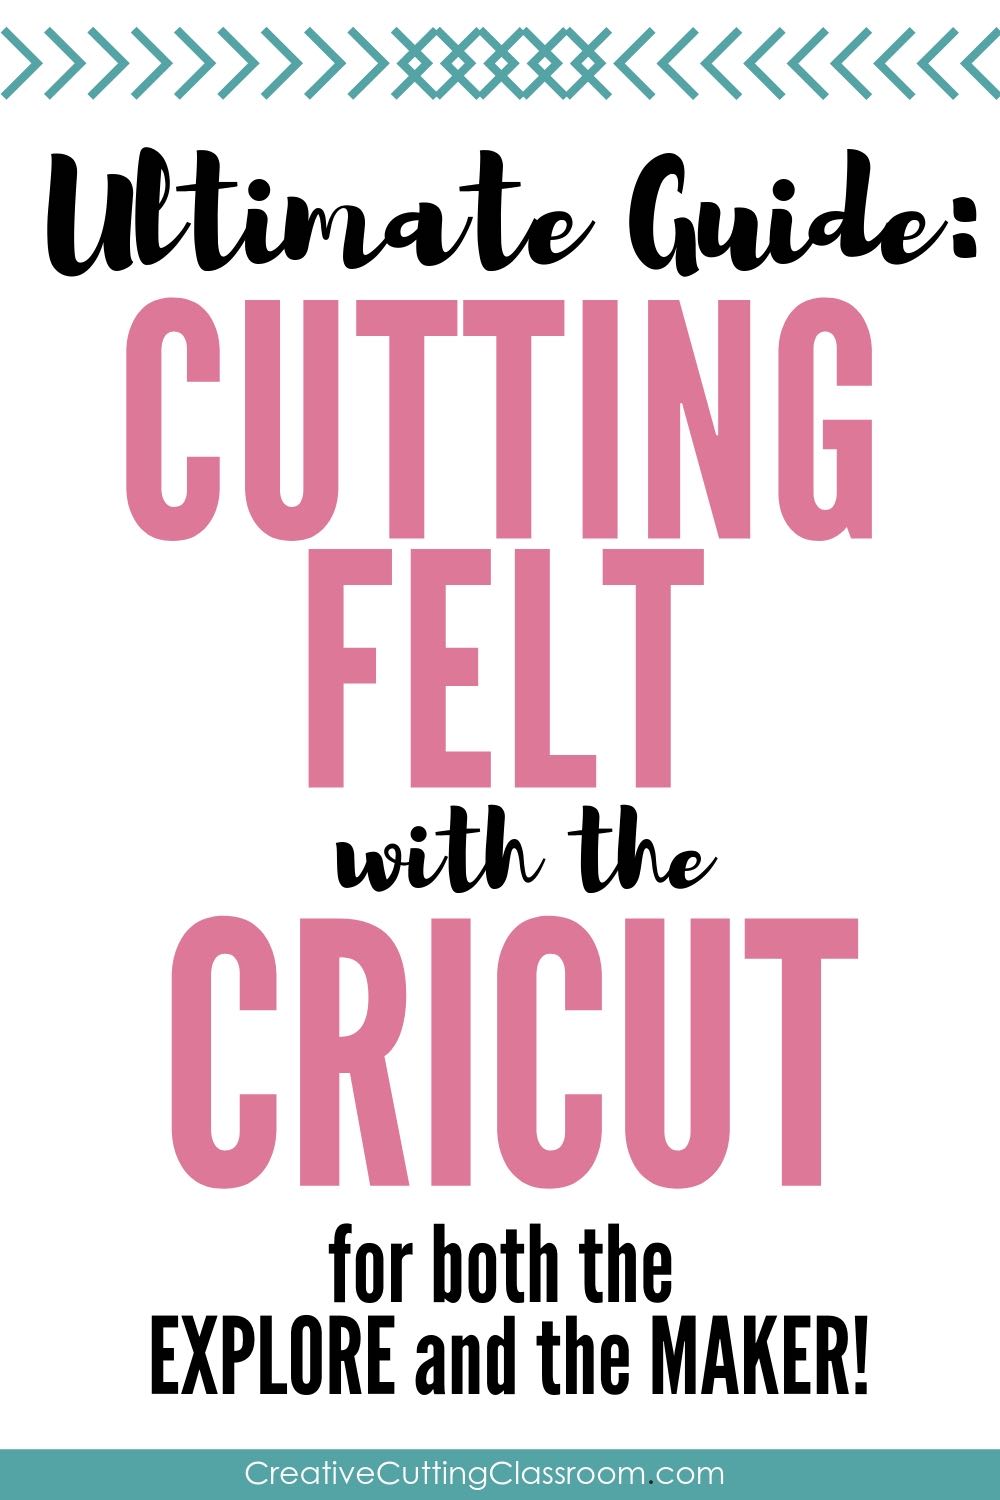 How to Cut Felt with a Cricut Explore and Maker - Hey, Let's Make Stuff